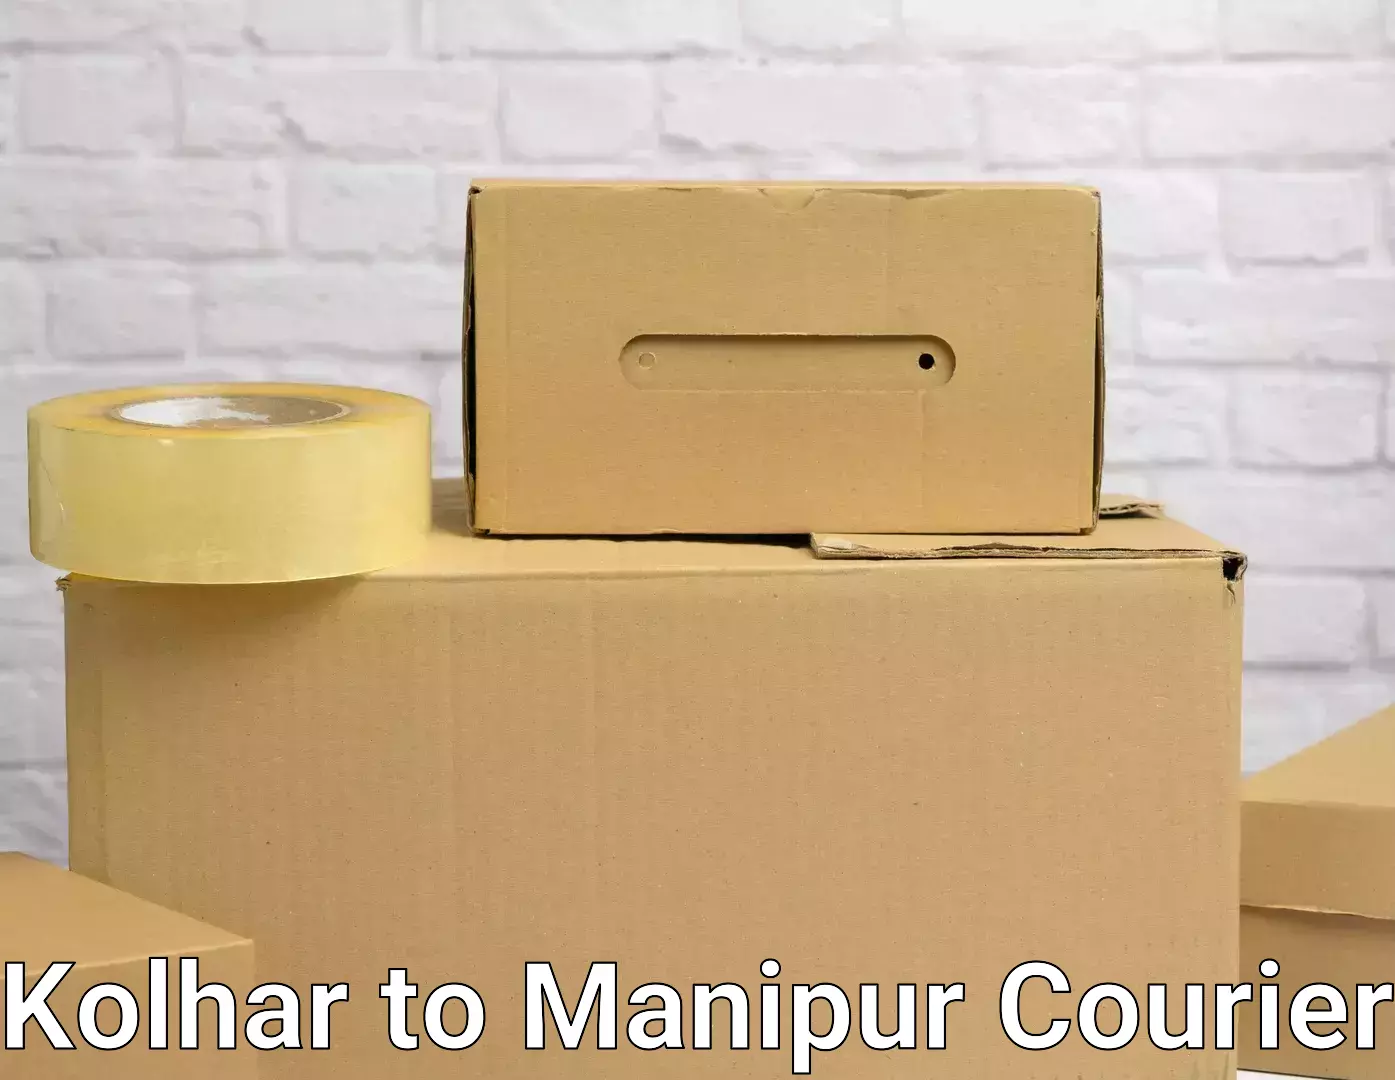 Moving and packing experts Kolhar to Manipur